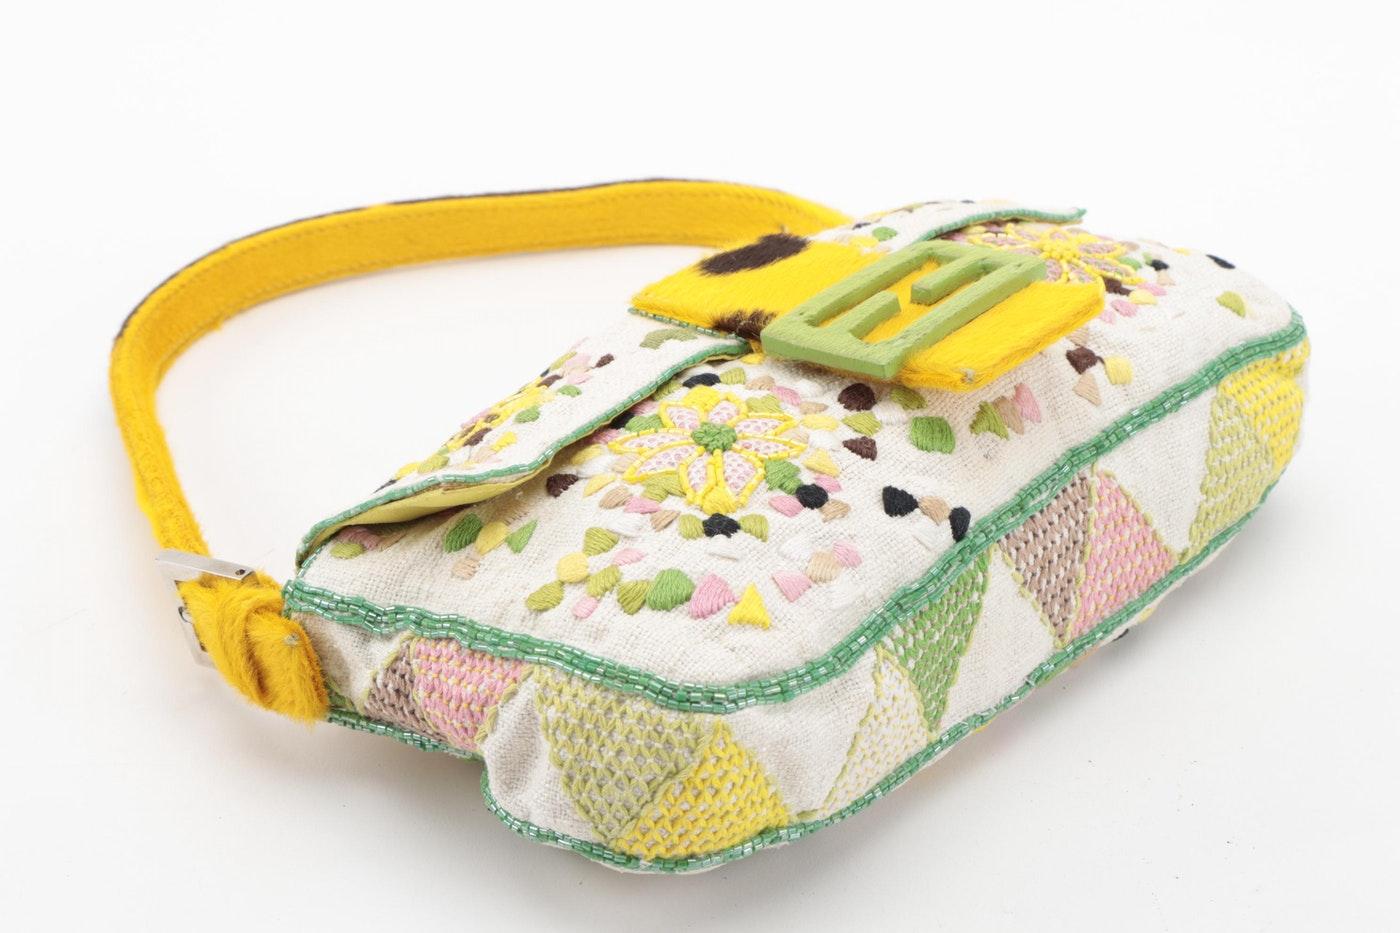 Show off this Fendi with all your looks! Circa late 1990s, this unique Fendi baguette is crafted from woven canvas and features a colorful floral and geometric appliqué pattern with beading around the trim. Includes silver hardware and a yellow pony